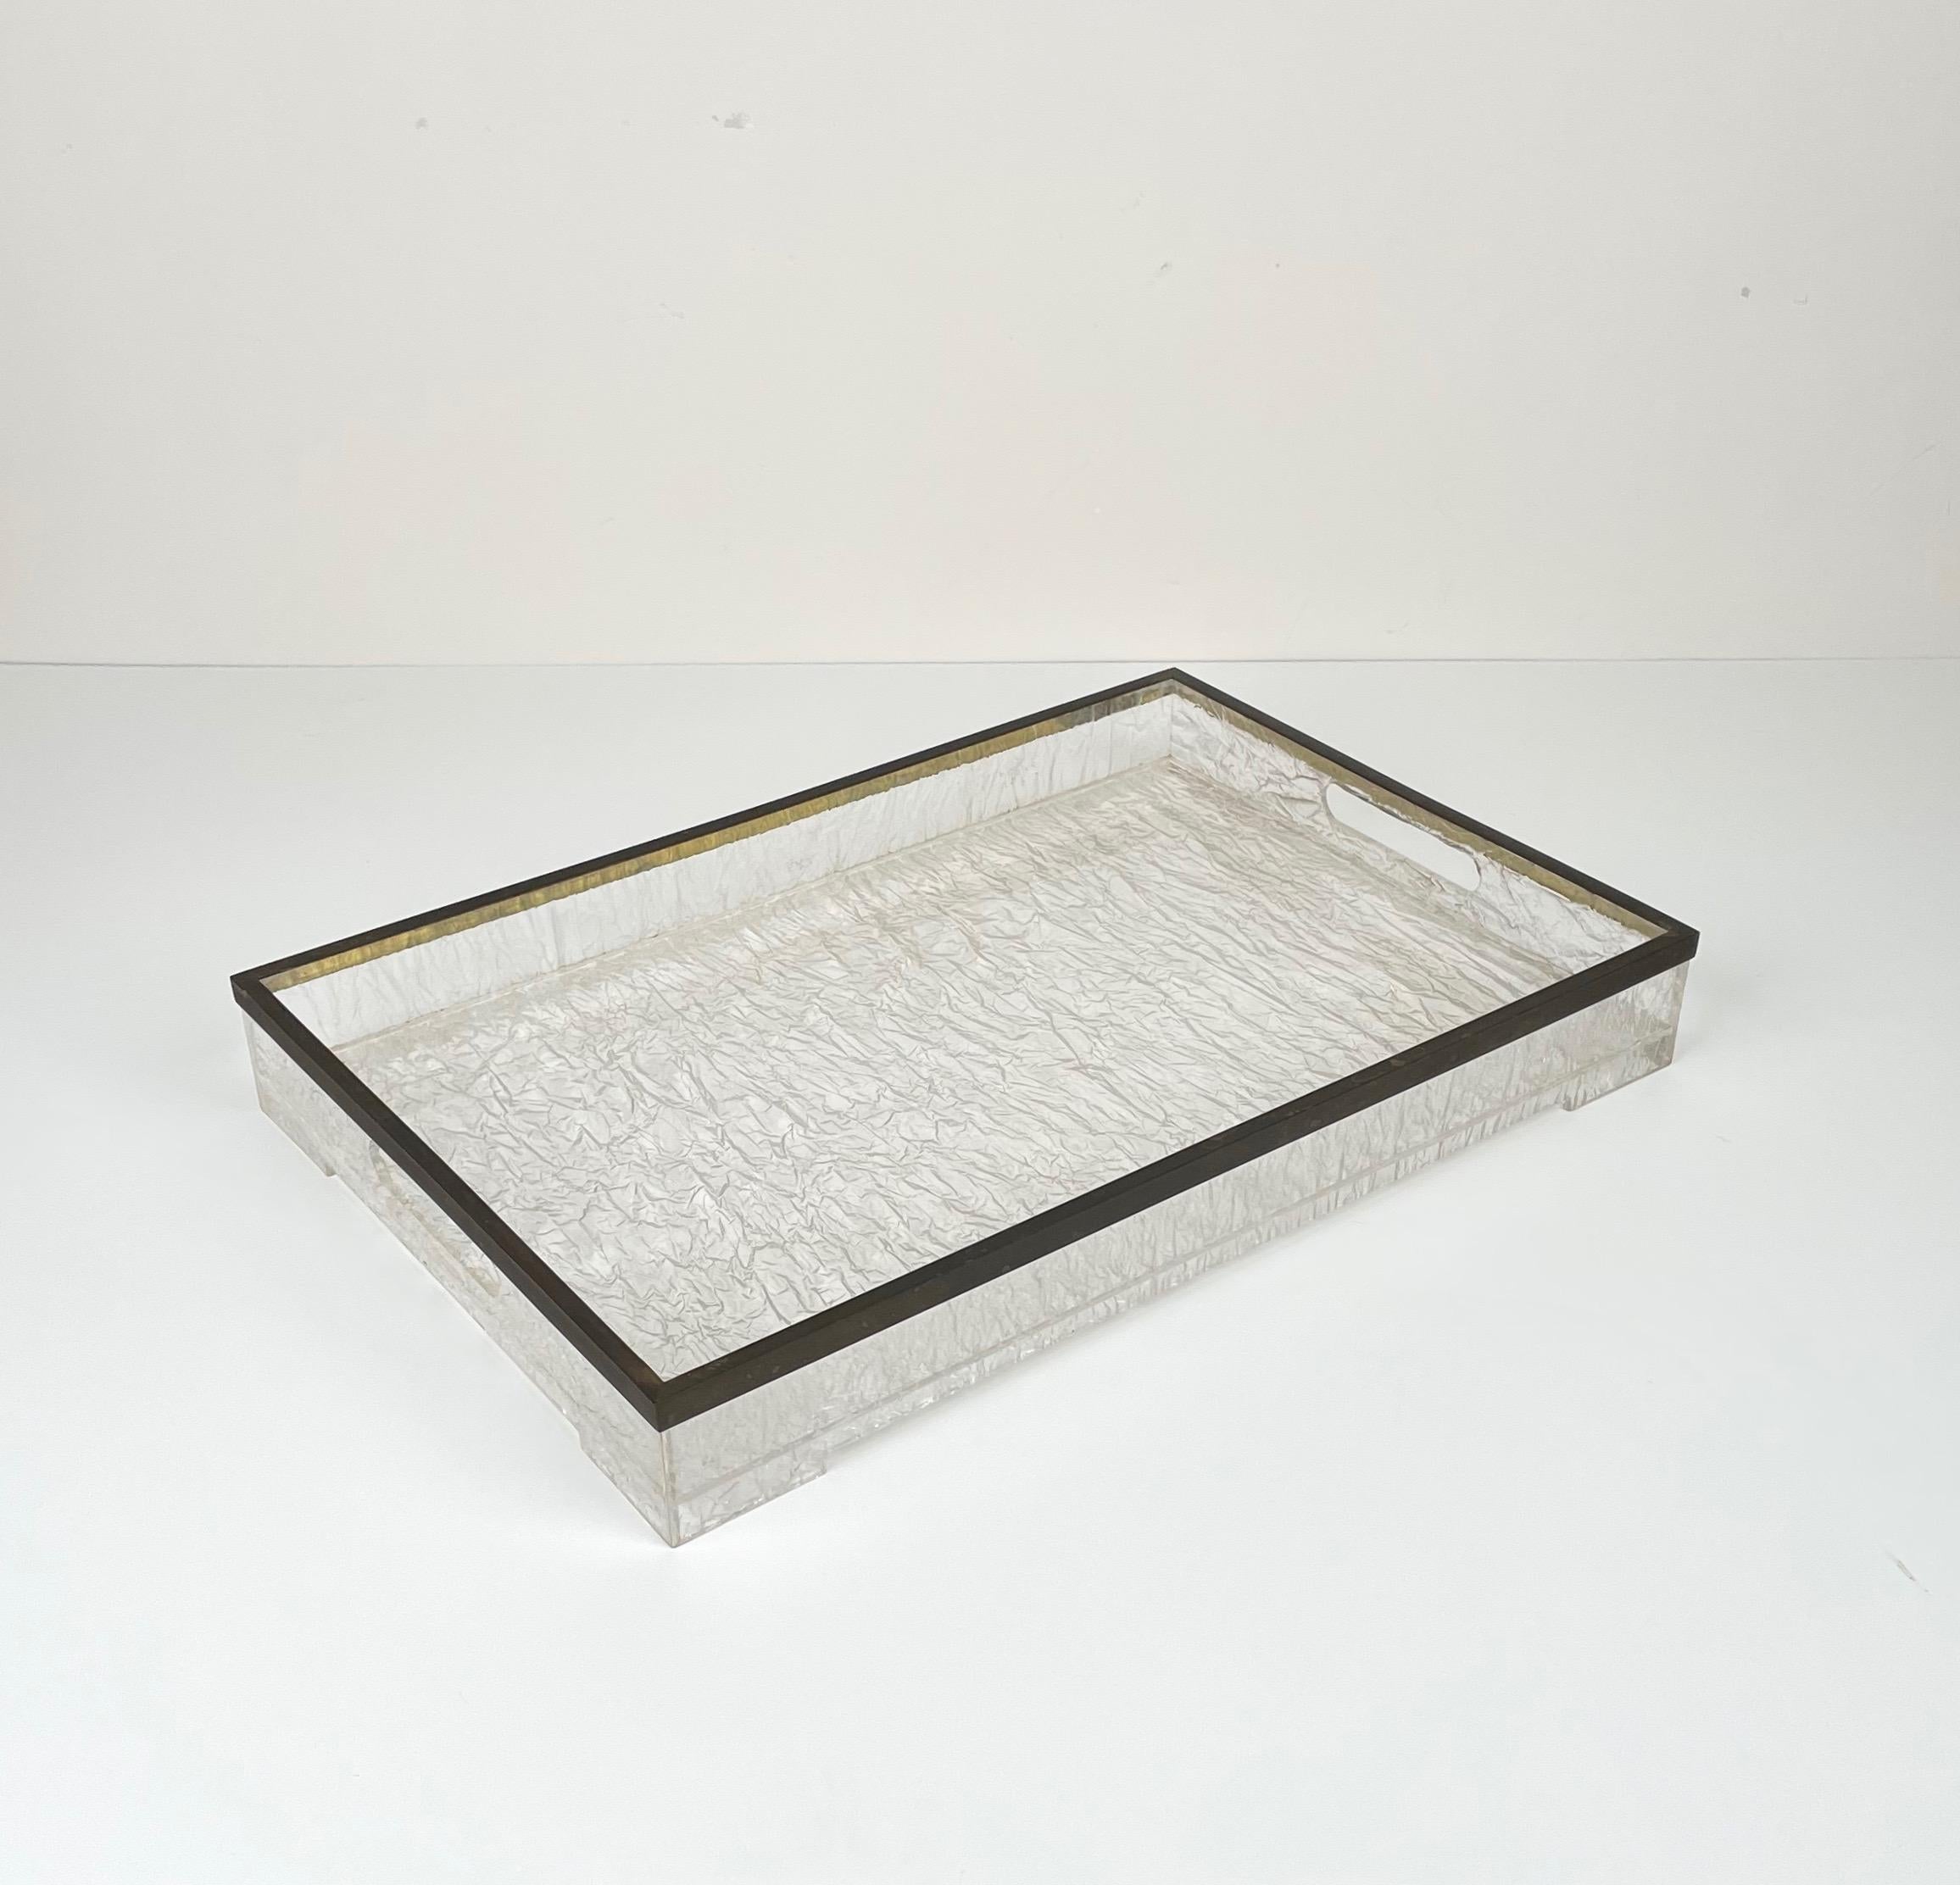 Italian Willy Rizzo Style Serving Tray in Ice Effect Lucite and Brass, Italy, 1970s For Sale